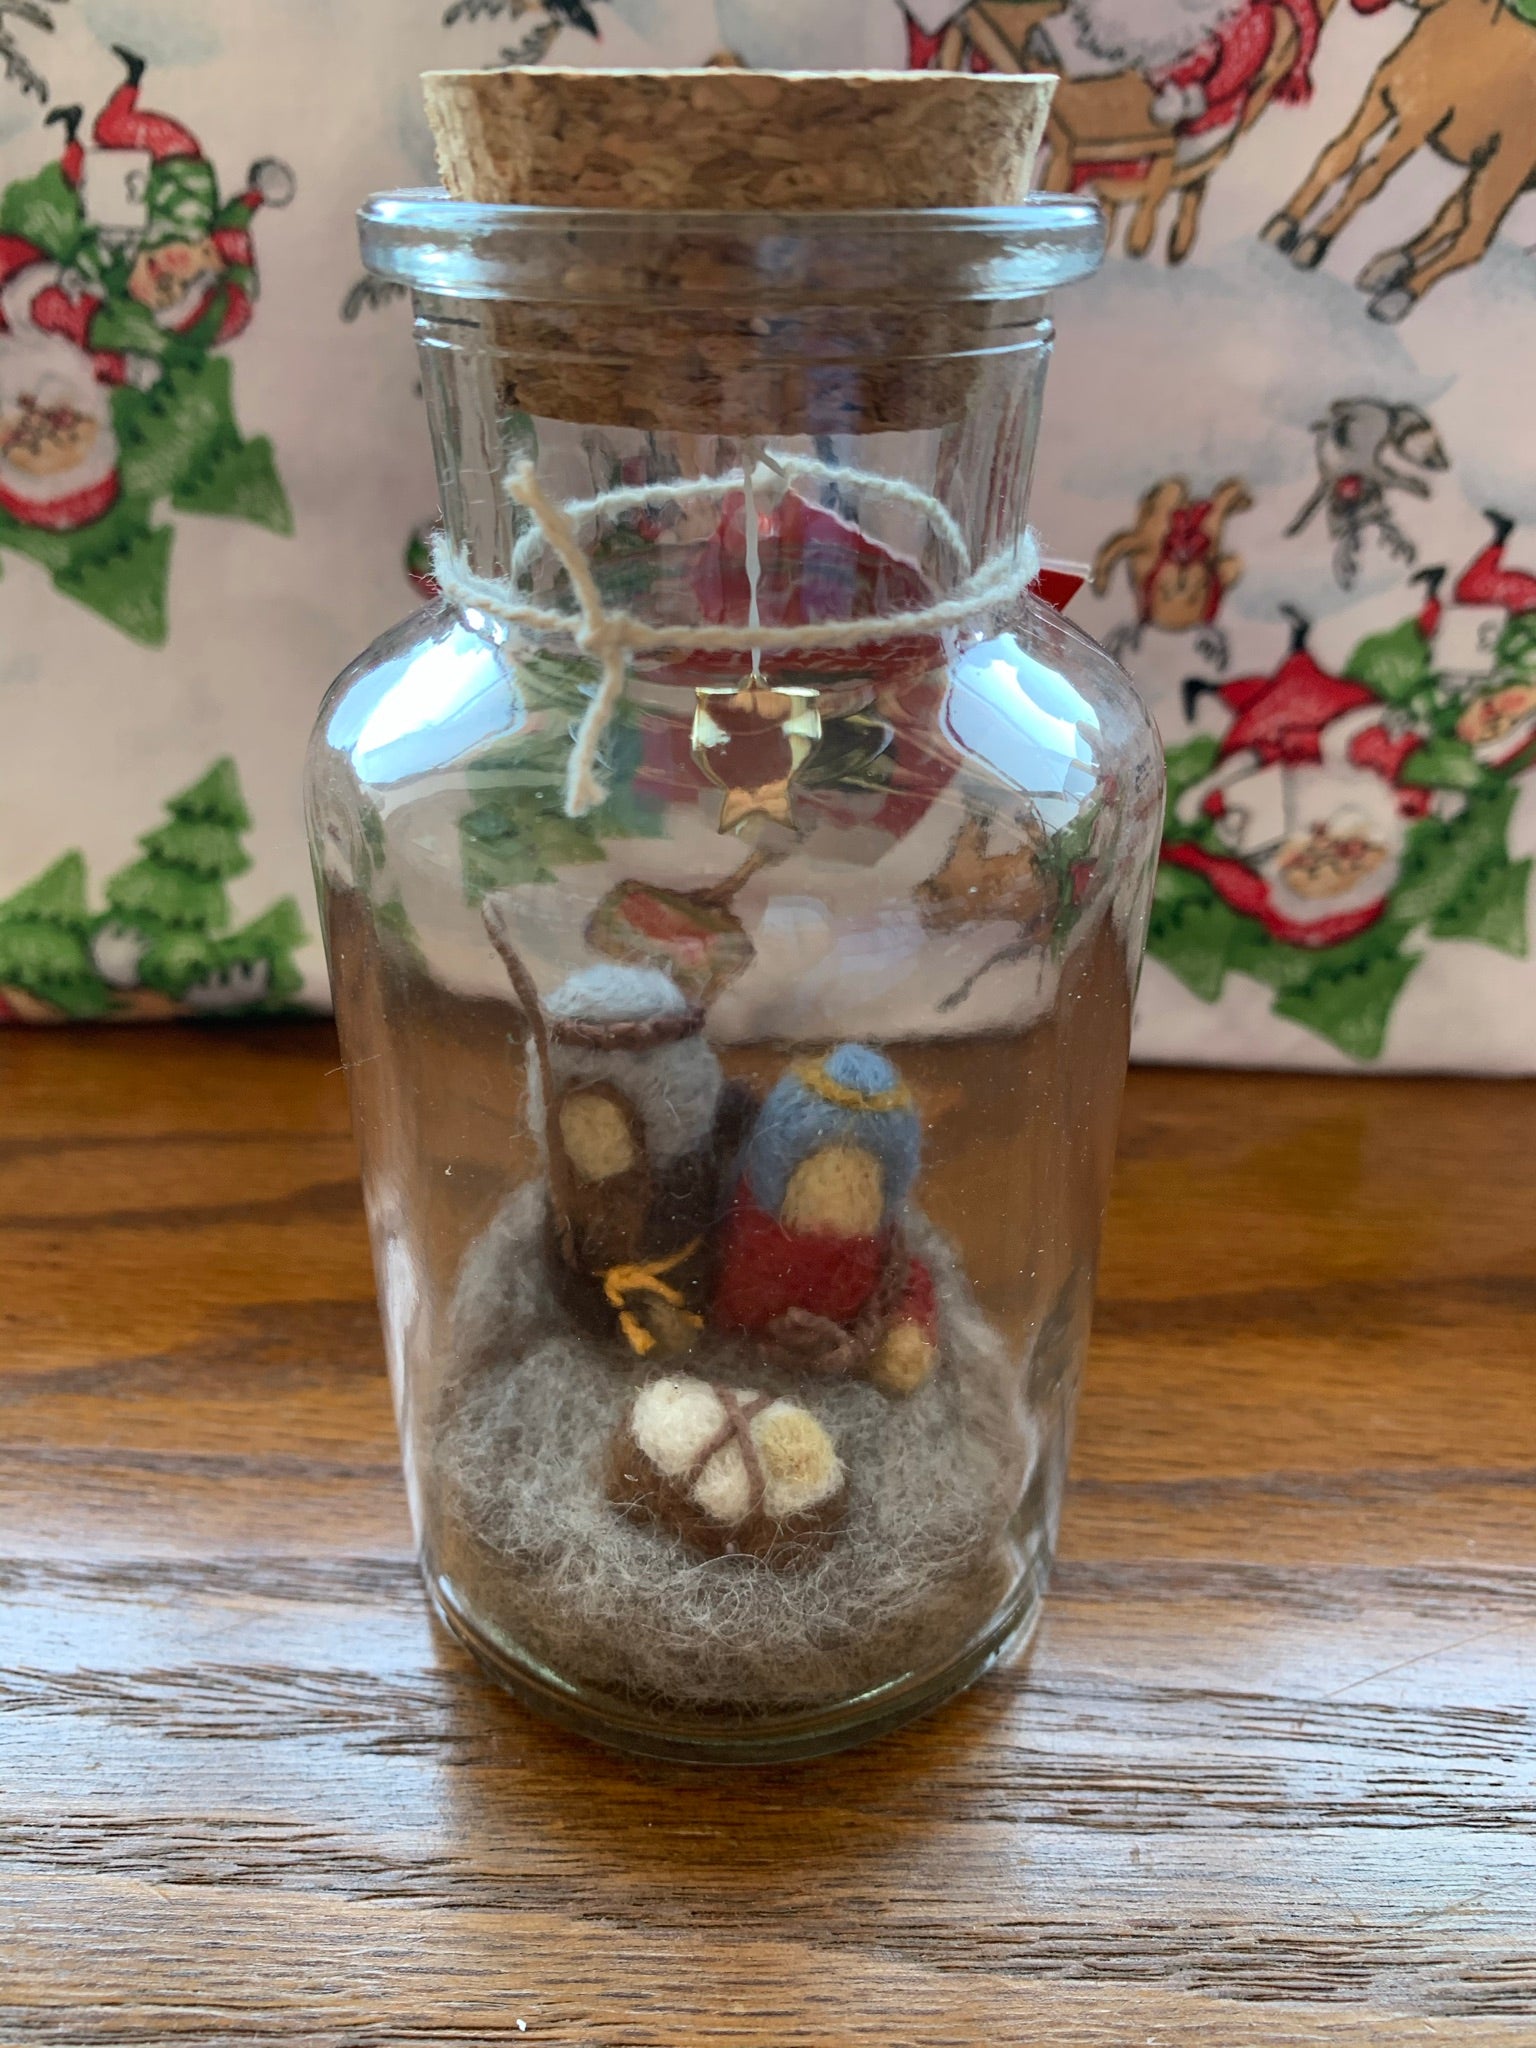 This Nativity story jar Christmas ornament displays Mary, Joseph and baby Jesus with a star above them, sitting on the ground. They sit inside a corked apothecary bottle. The Nativity is made of 100% natural wool. The bottle is affixed with a metal wire for hanging, but can also be placed on a shelf or table top. Approximately 3"x1" (6.75" if you include the wire hanger). It comes with a fair trade home and and garden tag.